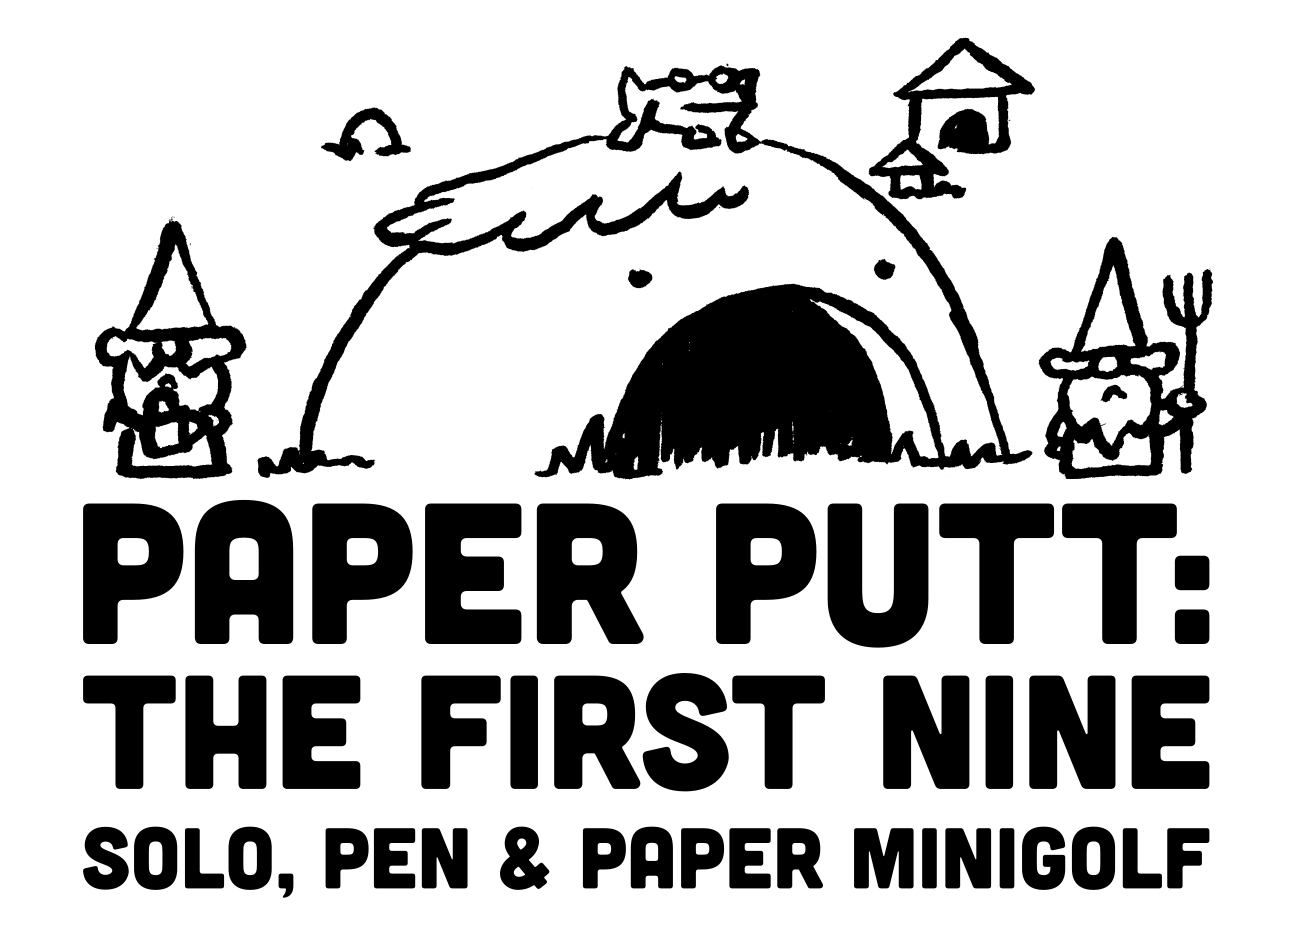 Paper Putt: The First Nine